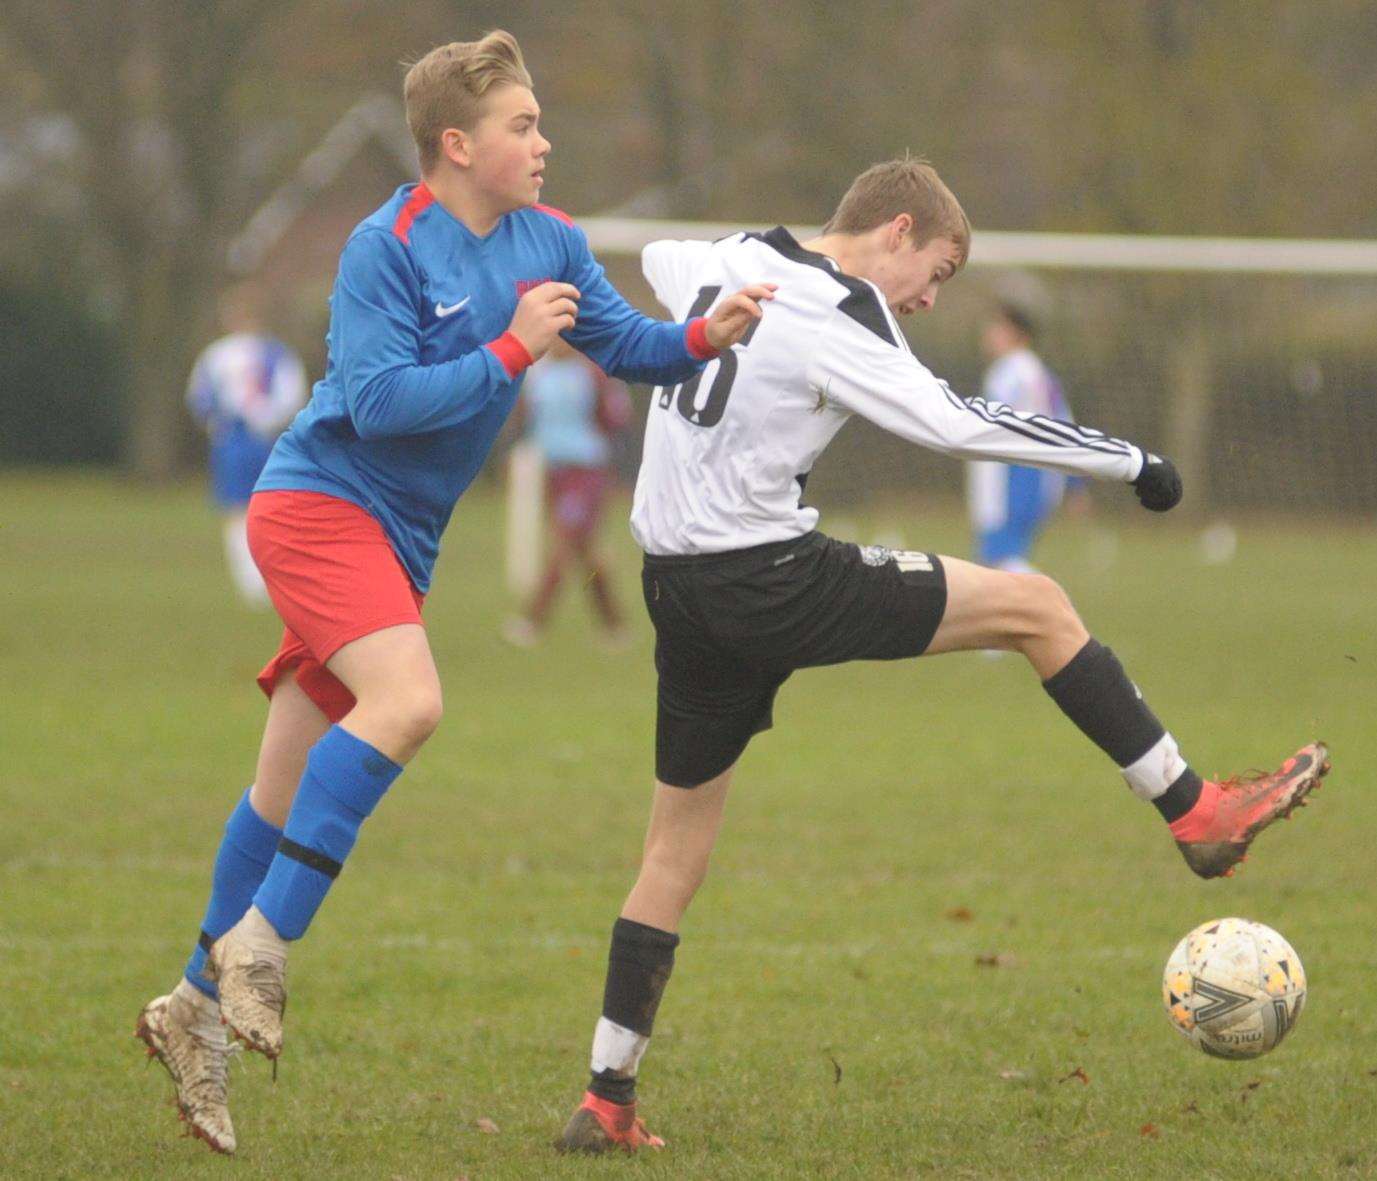 Rainham Kenilworth under-15s (blue) and Real 60 Panthers clash with Division 1 points up for grabs Picture: Steve Crispe